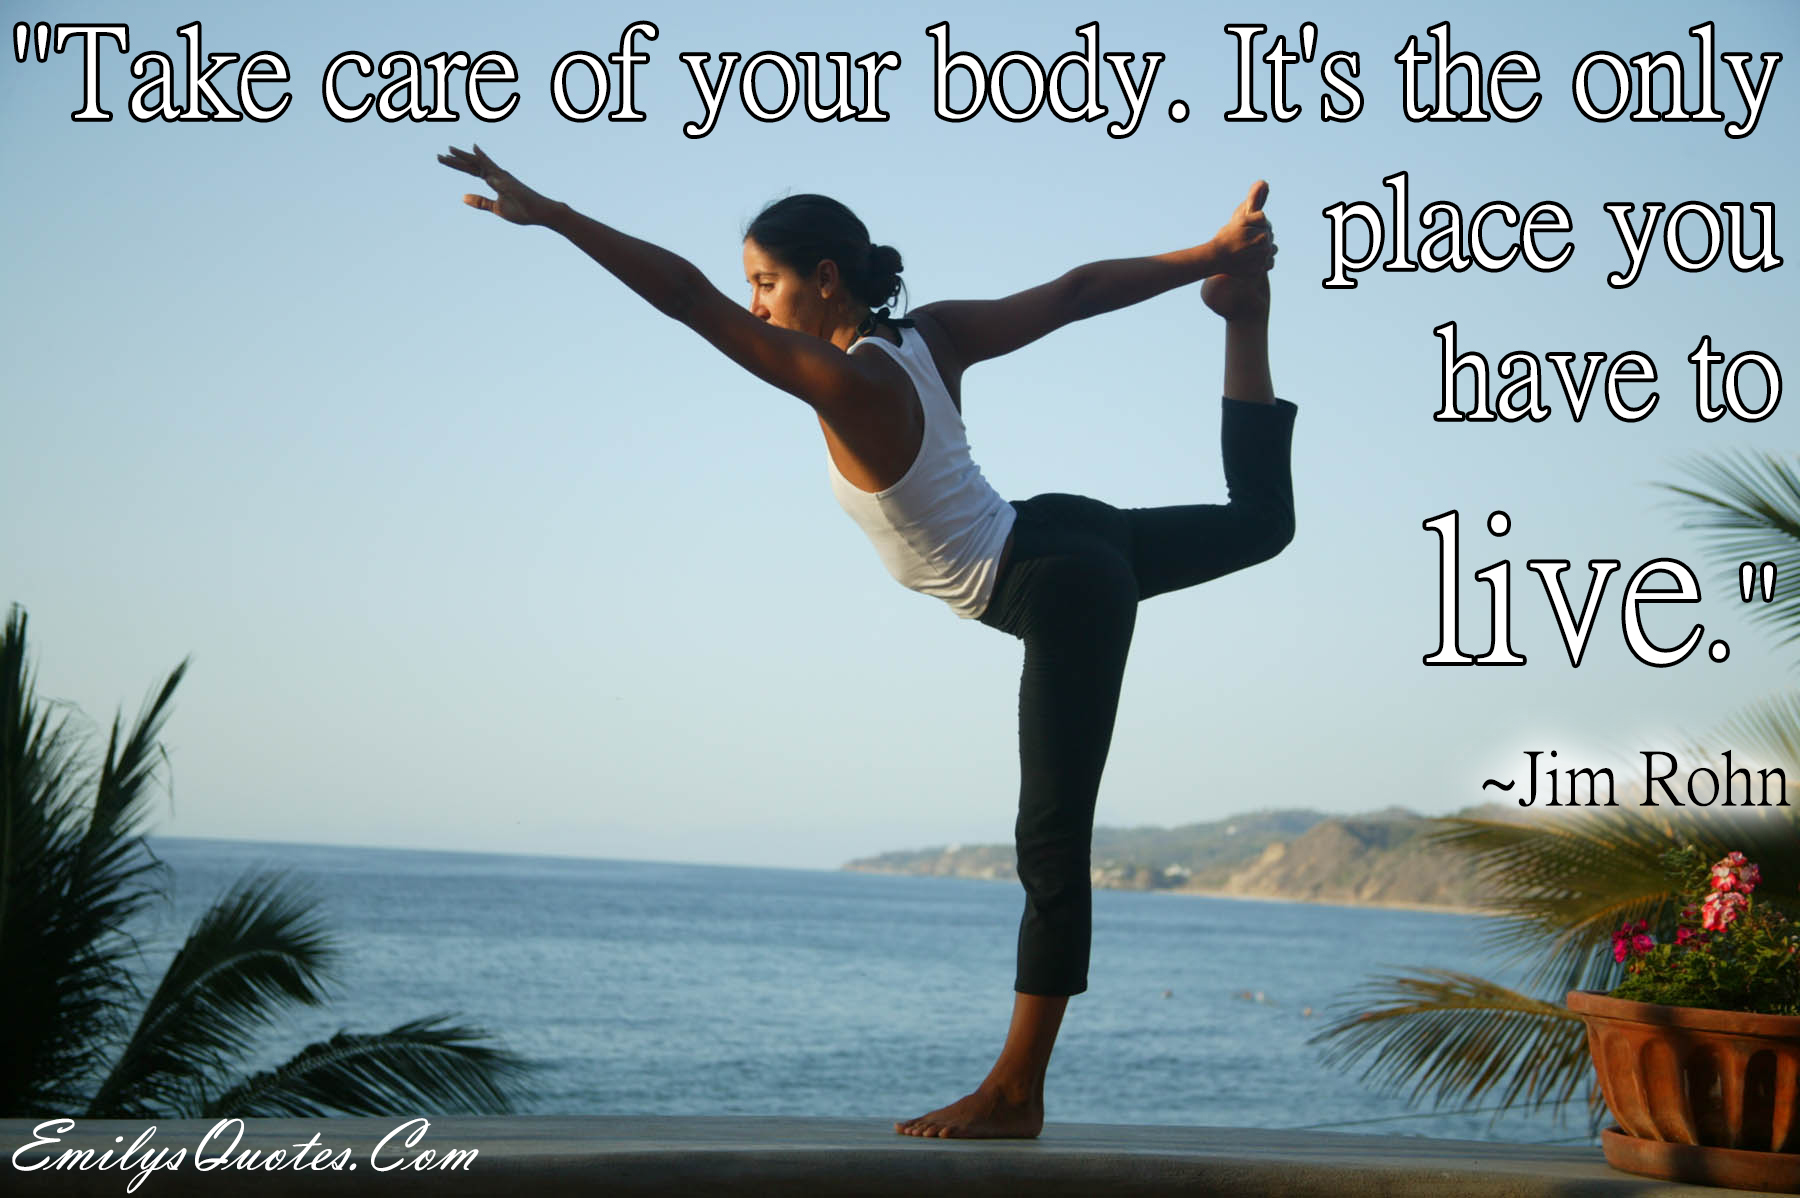 Take care of your body. It’s the only place you have to live